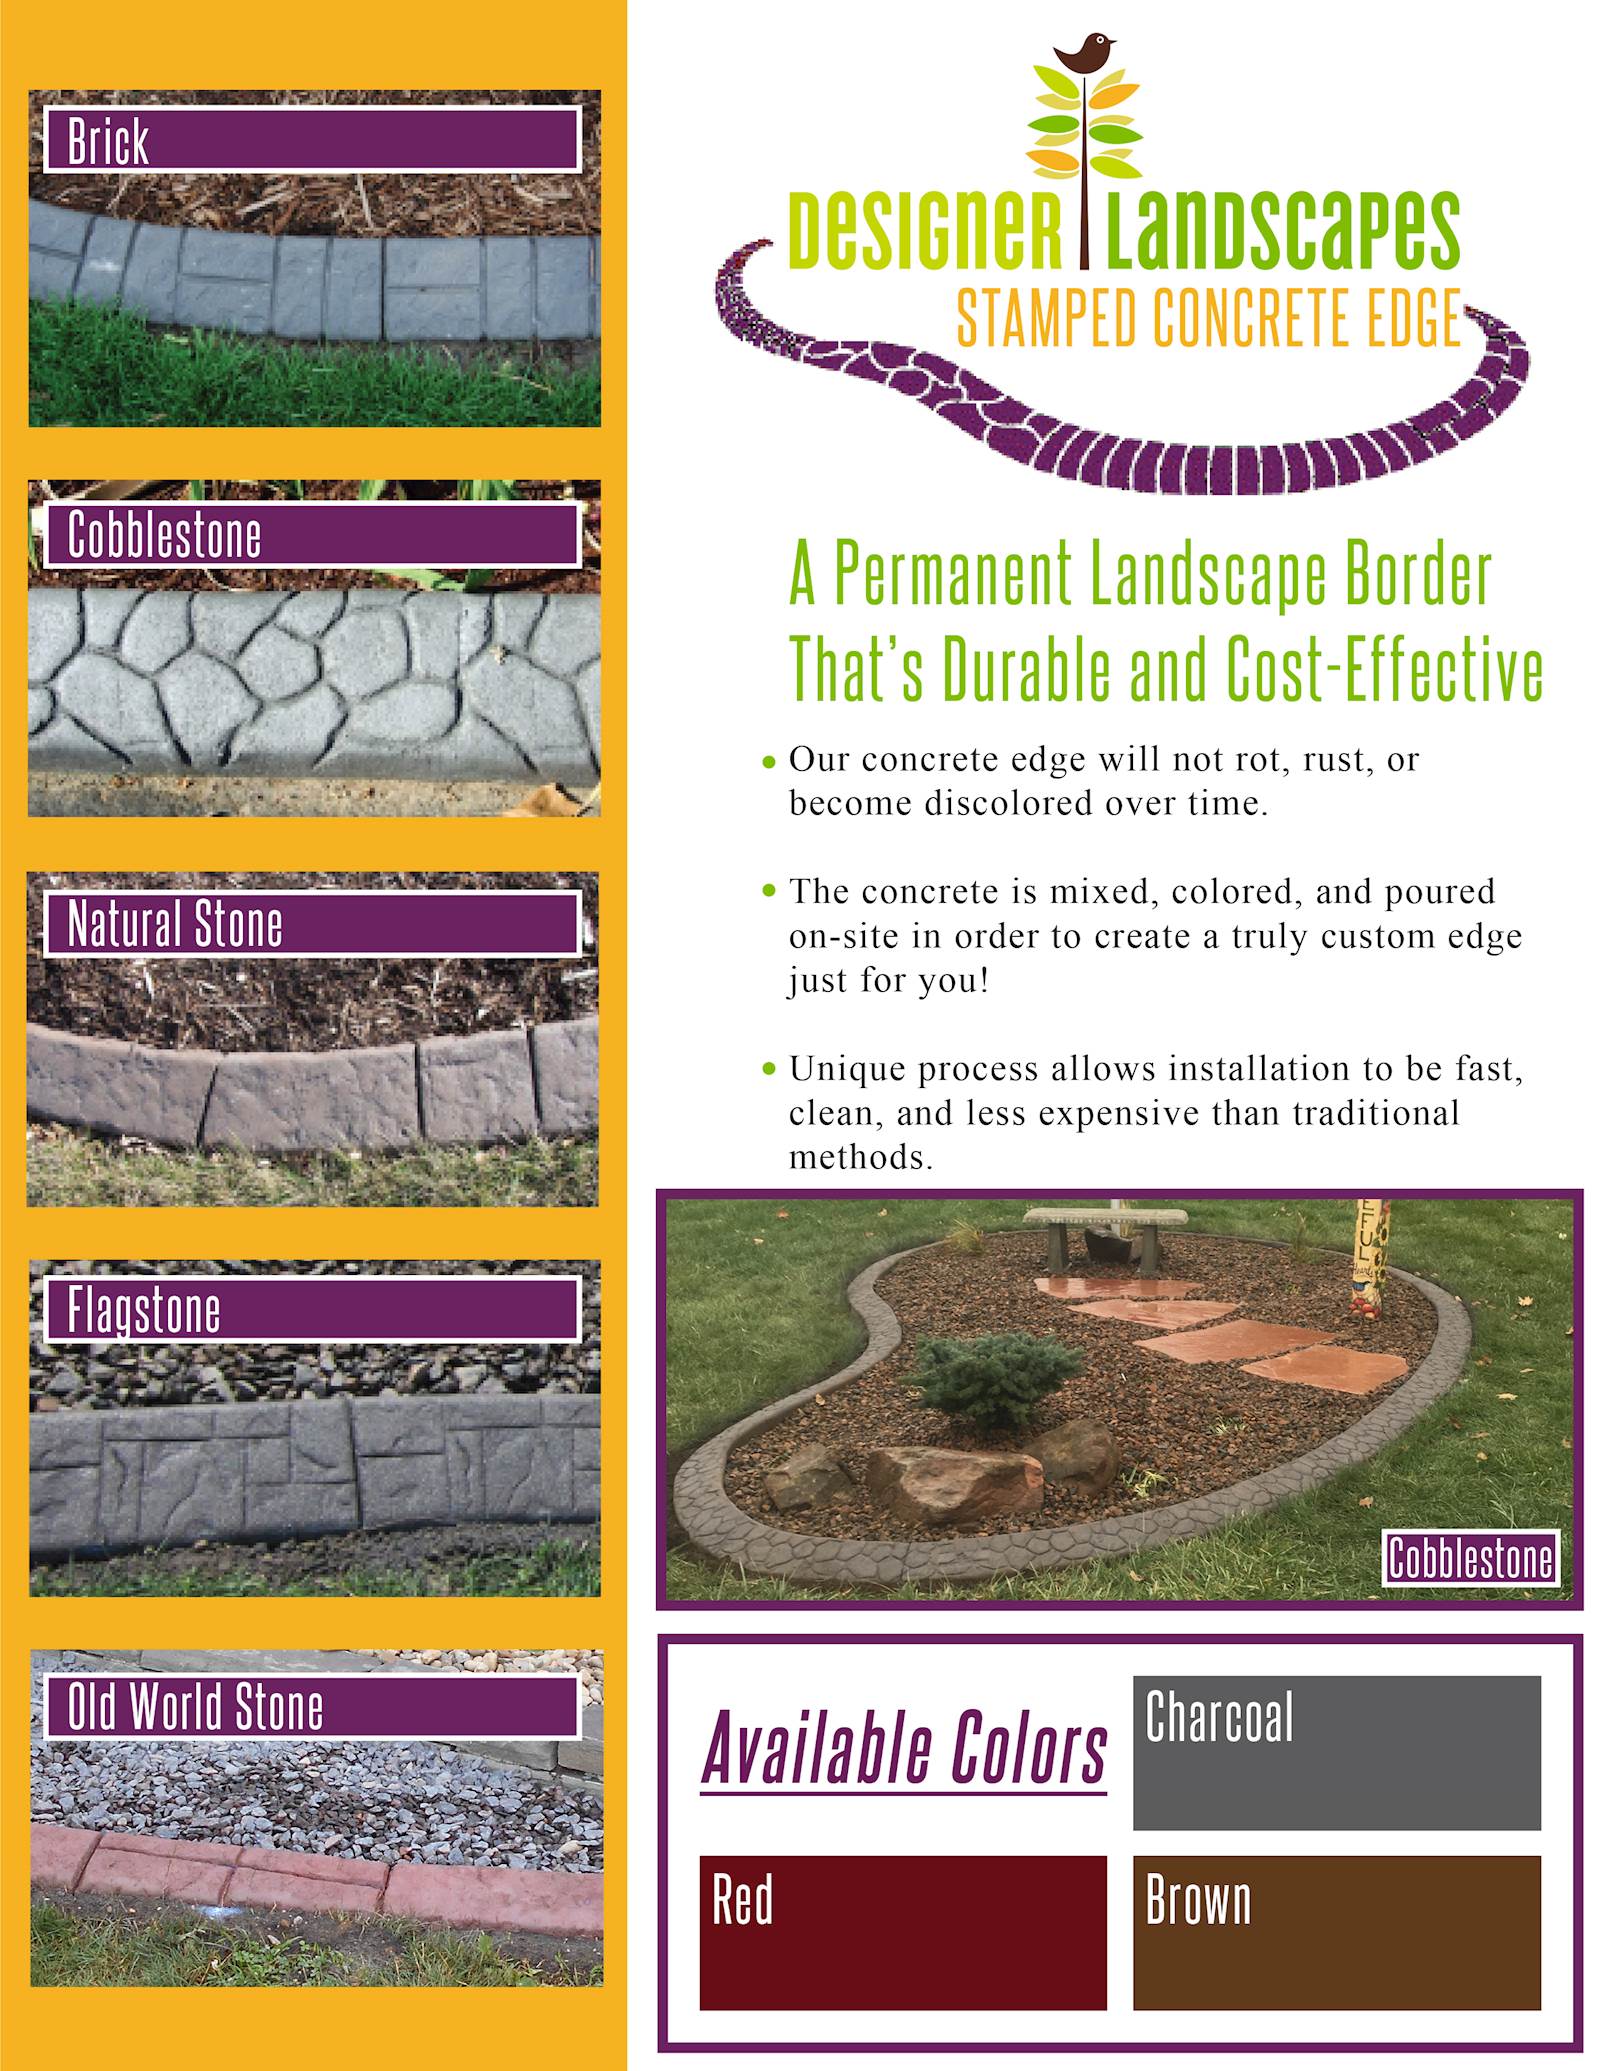 Concrete edging is a permanent landscape border that is durable and cost-effective